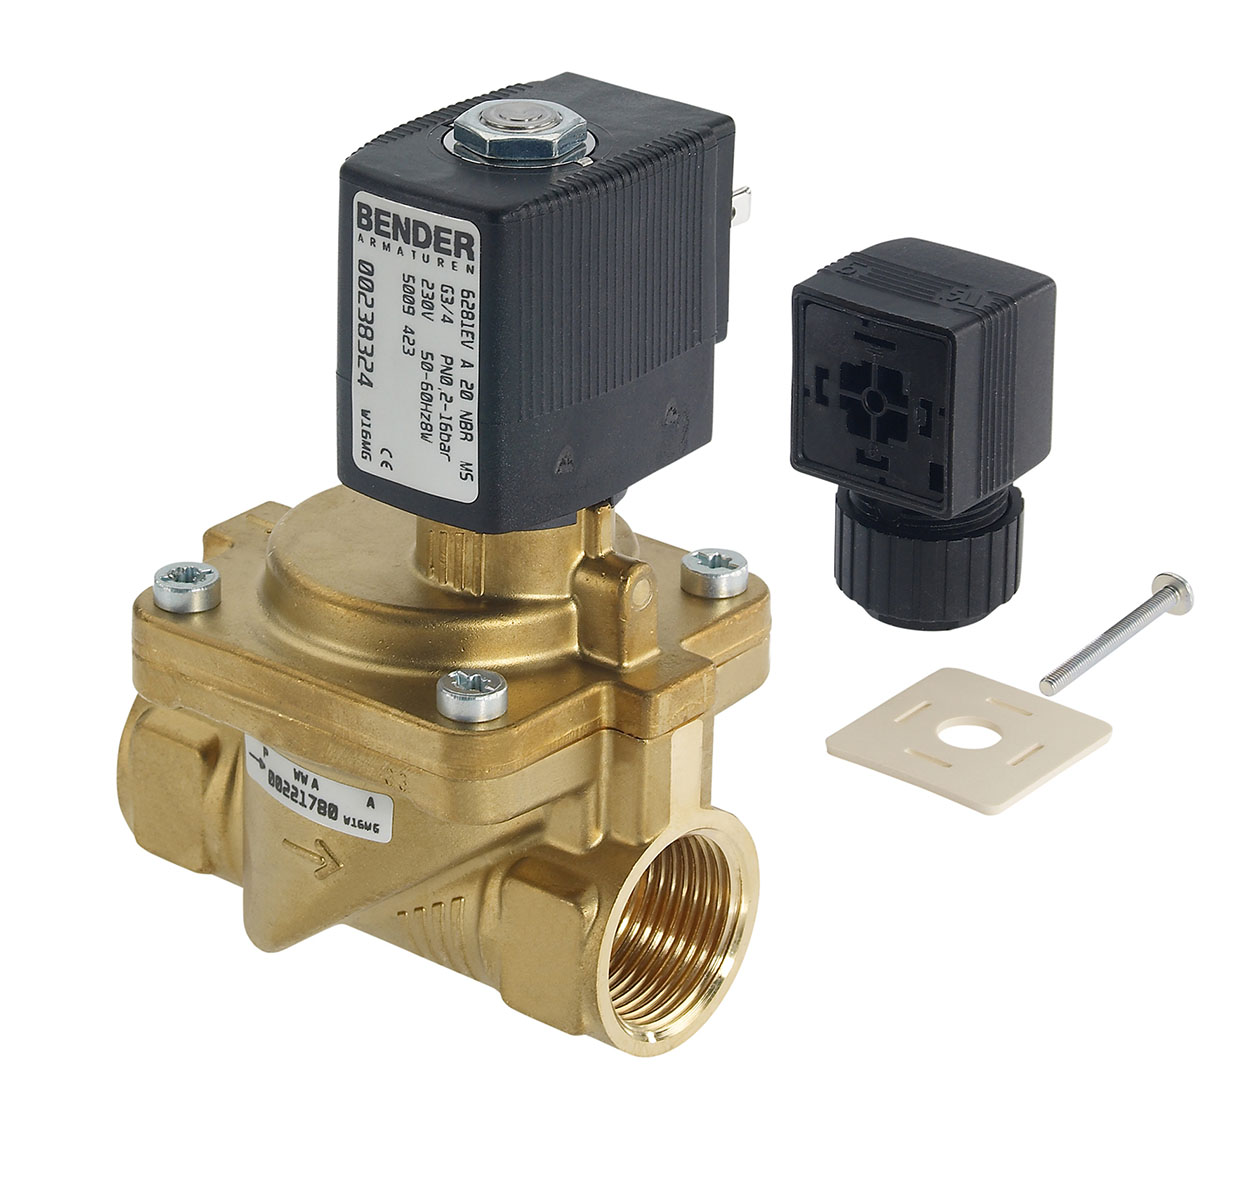 5009407 - 2/2 way solenoid valve normally closed for fluids and compressed air Type 3; female thread